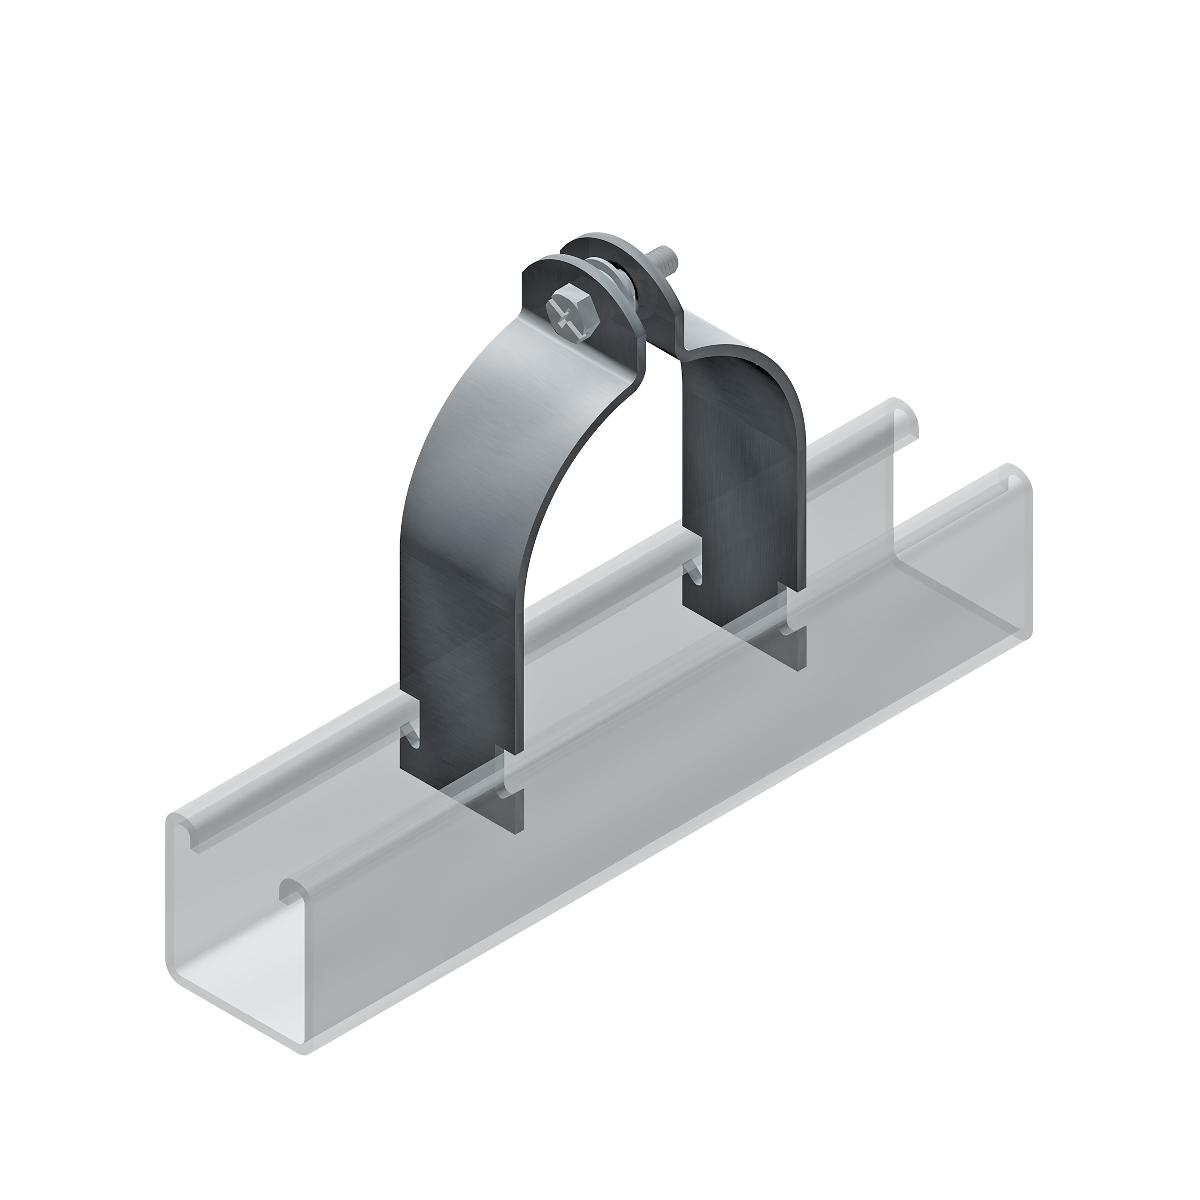 E5-64H TWO PIECE PIPE CLAMP HDG